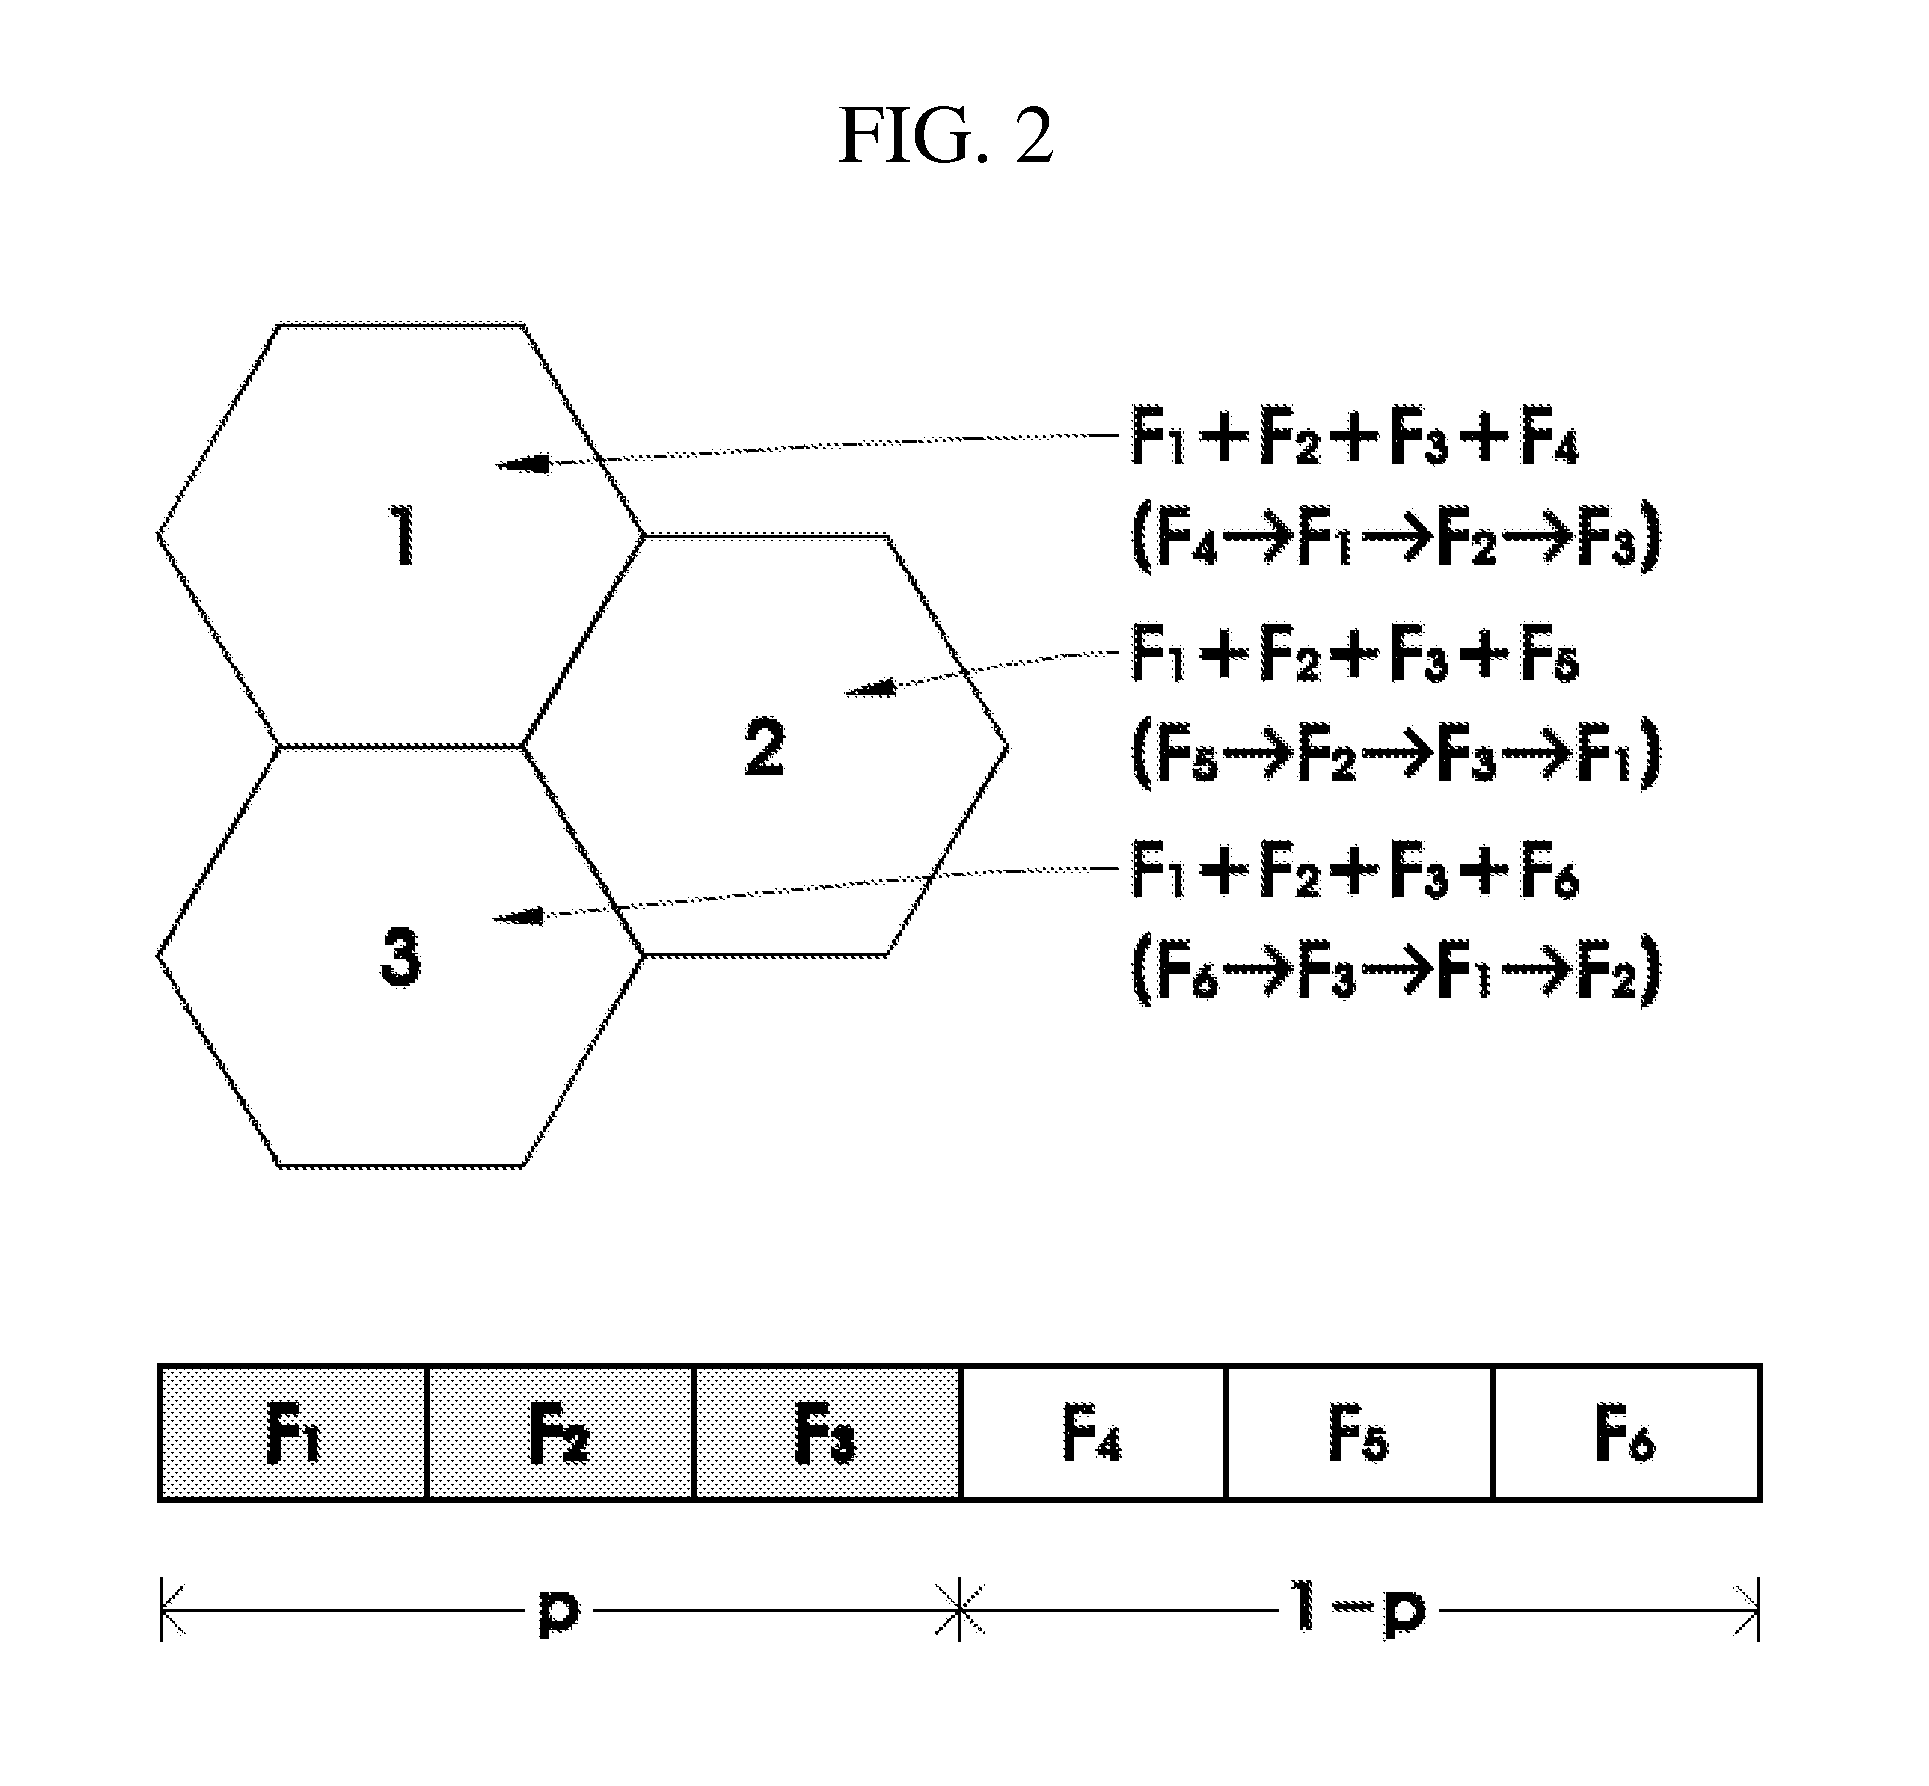 Method for fractional frequency reuse with ordering scheme to increase capacity of OFDM systems